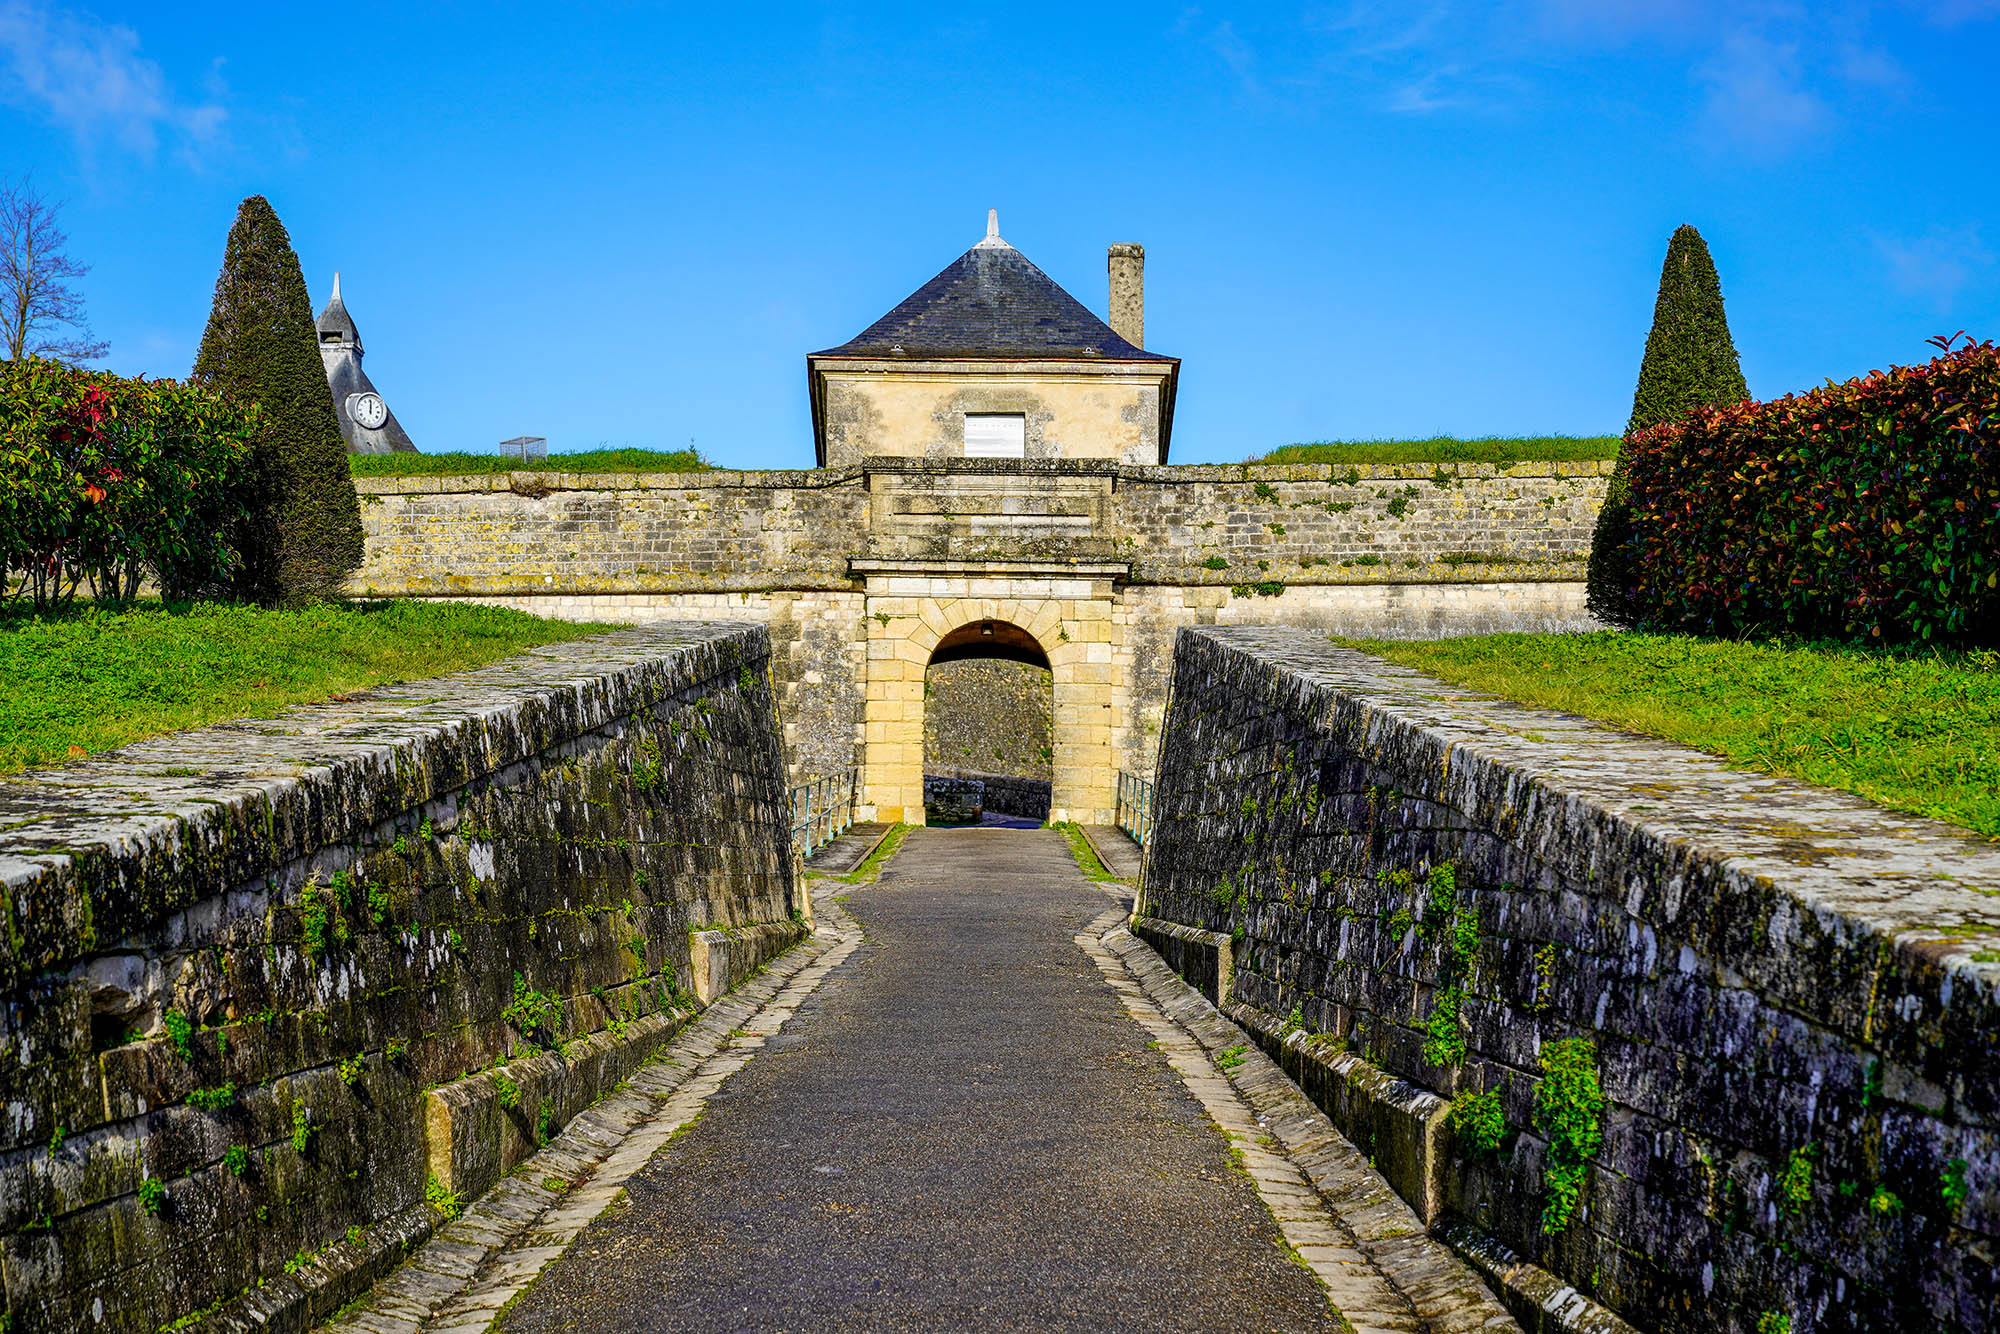 A narrow entrance arch to the citadel in Blaye in the Gironde